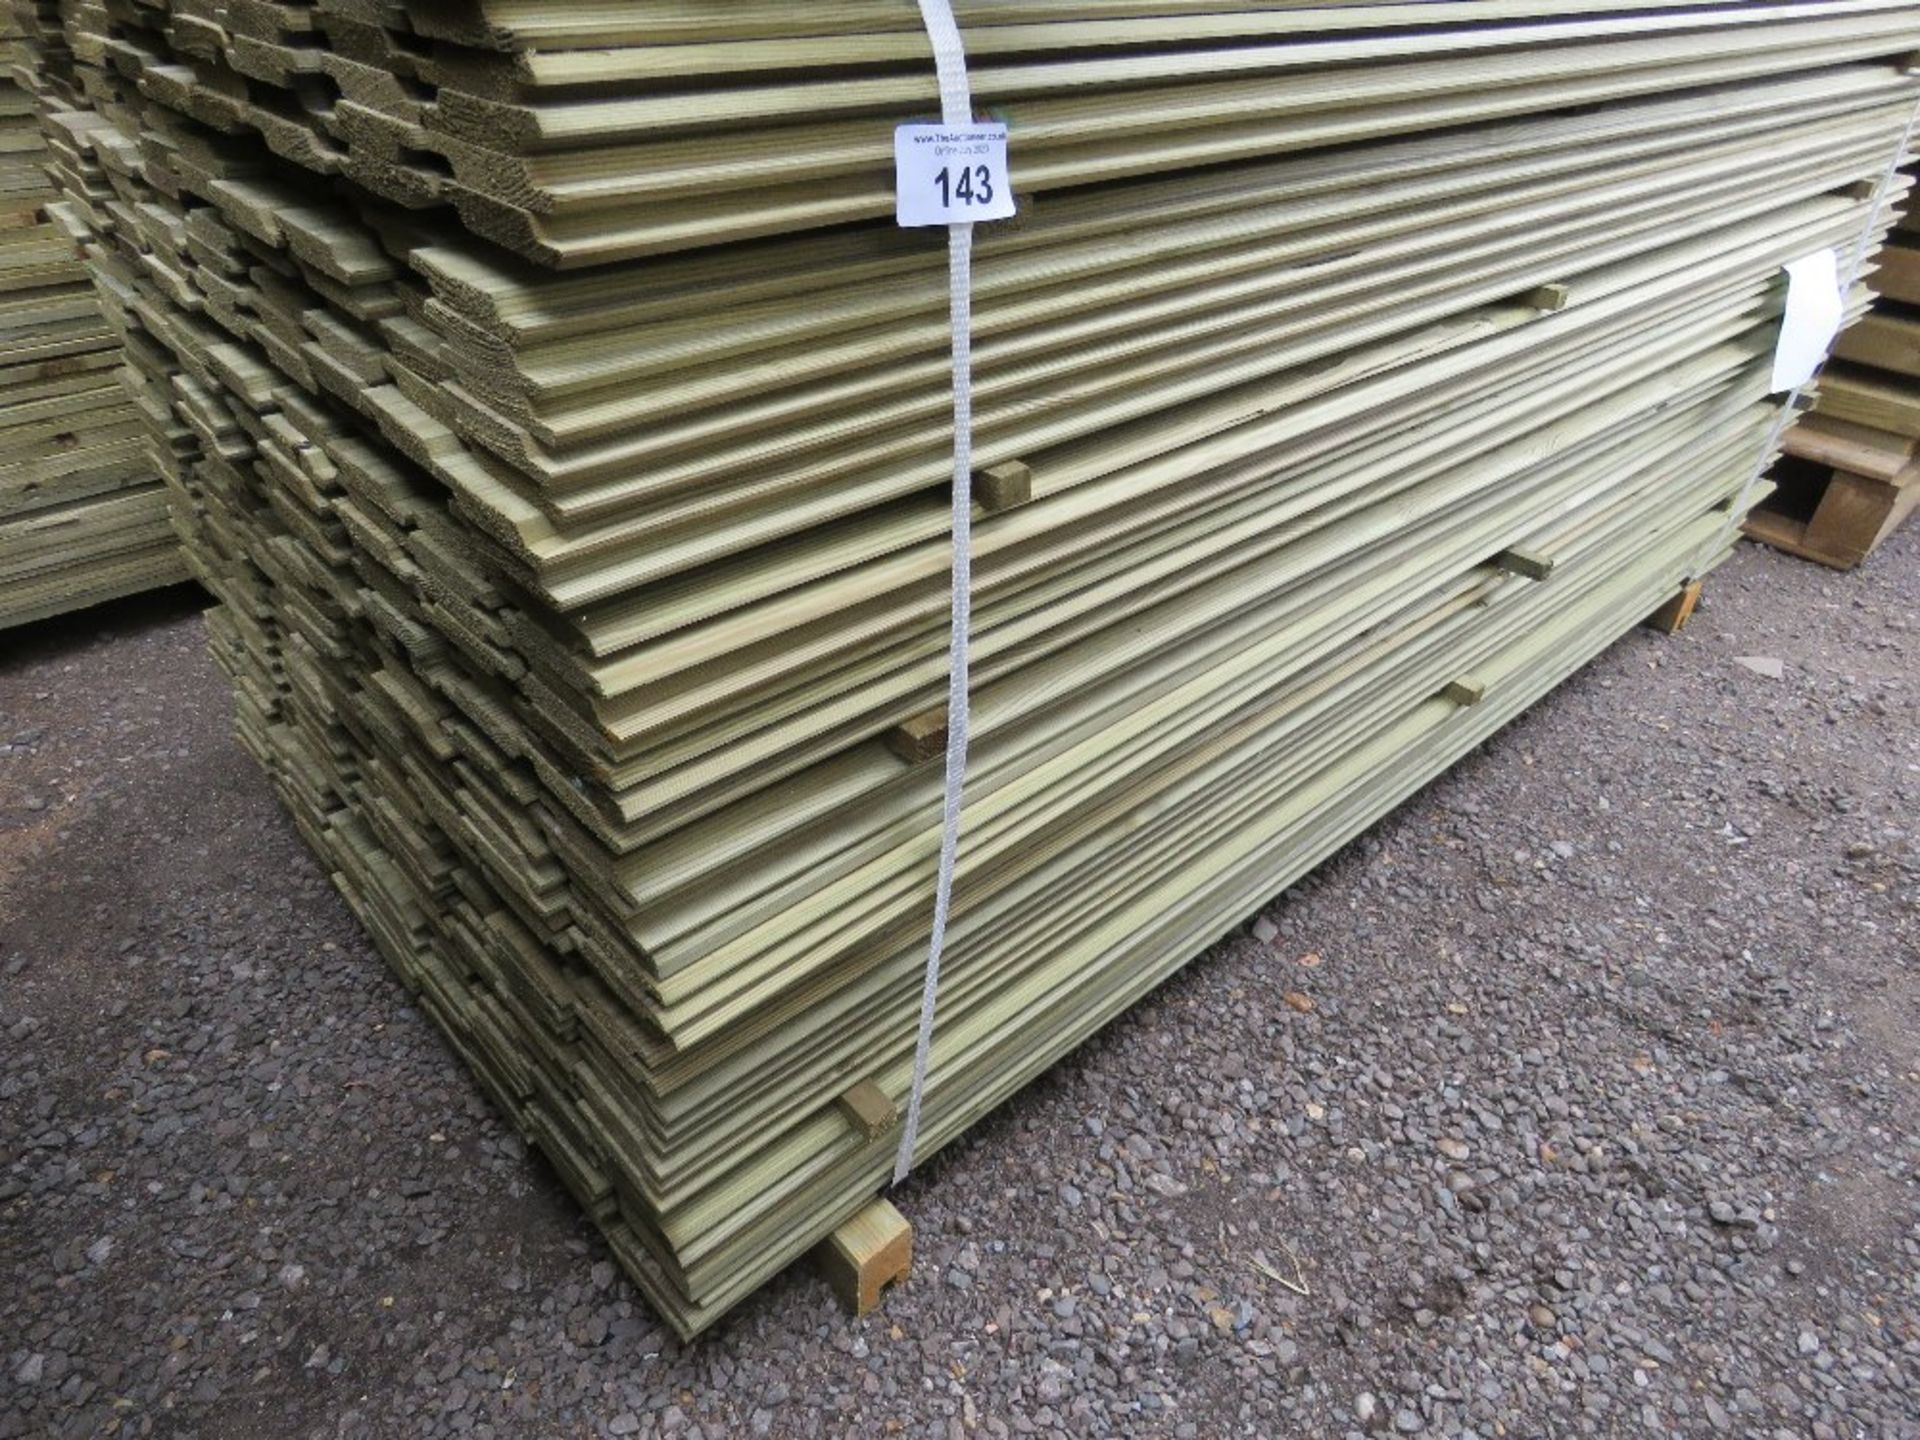 LARGE PACK OF PRESSURE TREATED SHIPLAP FENCE CLADDING TIMBER BOARDS. 1.83M LENGTH X 100MM WIDTH APPR